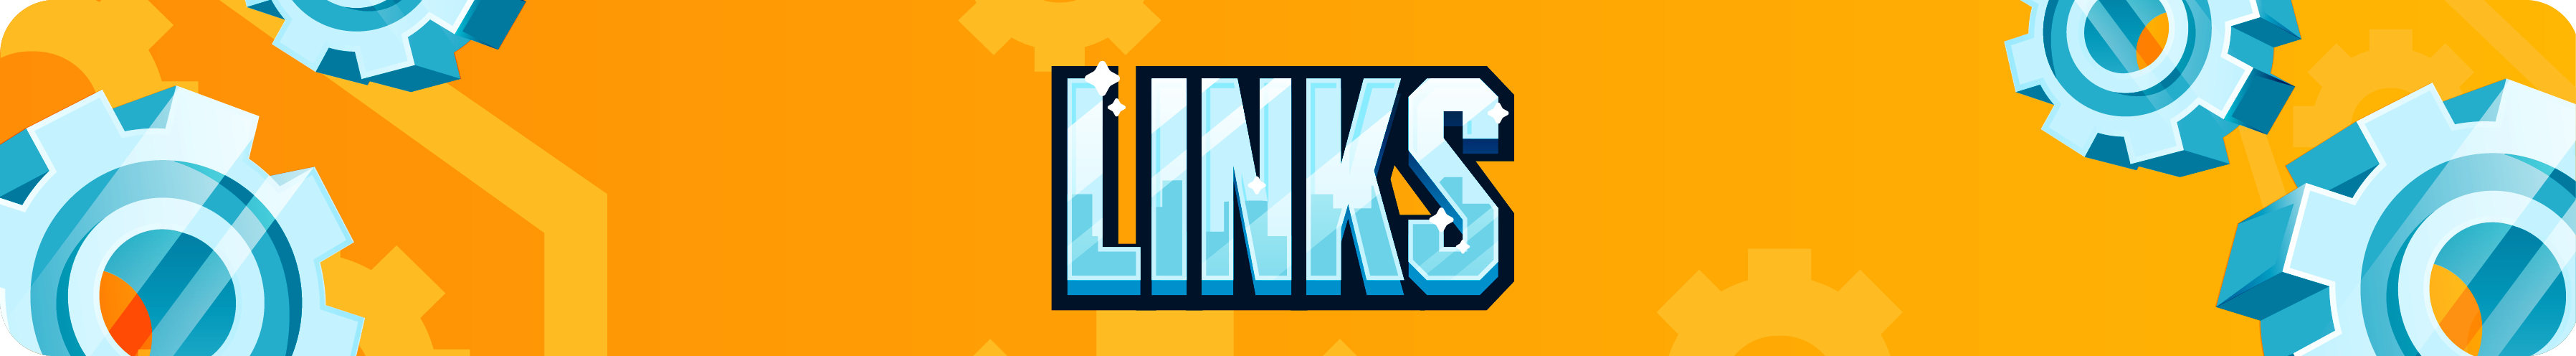 BH_ME_Links.png